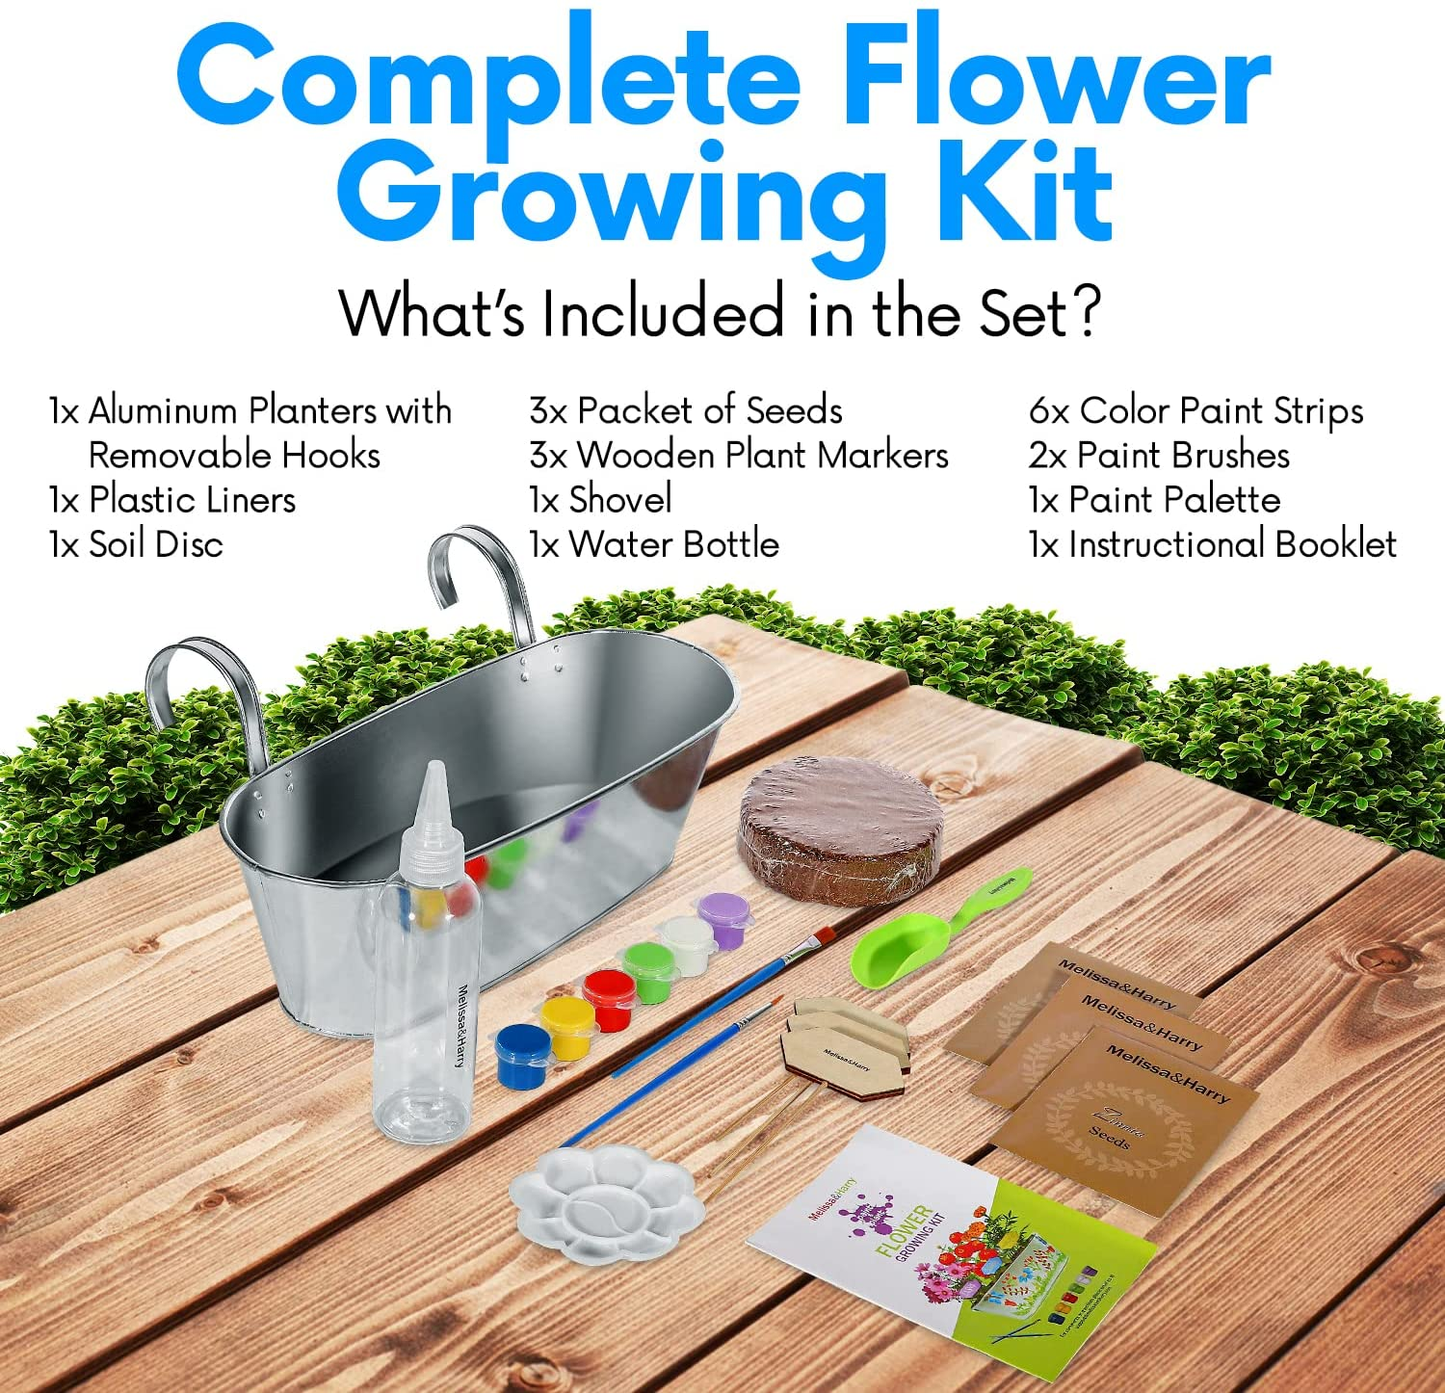 Melissa&Harry Kids Gardening Kit for Birthday, Crafts, Girls & Boys of All Ages 4, 5, 6, 7, 8-12 Year Old, Childrens Paint and Plant Flower Gardening Growing Kit-Stem Art Projects Toys